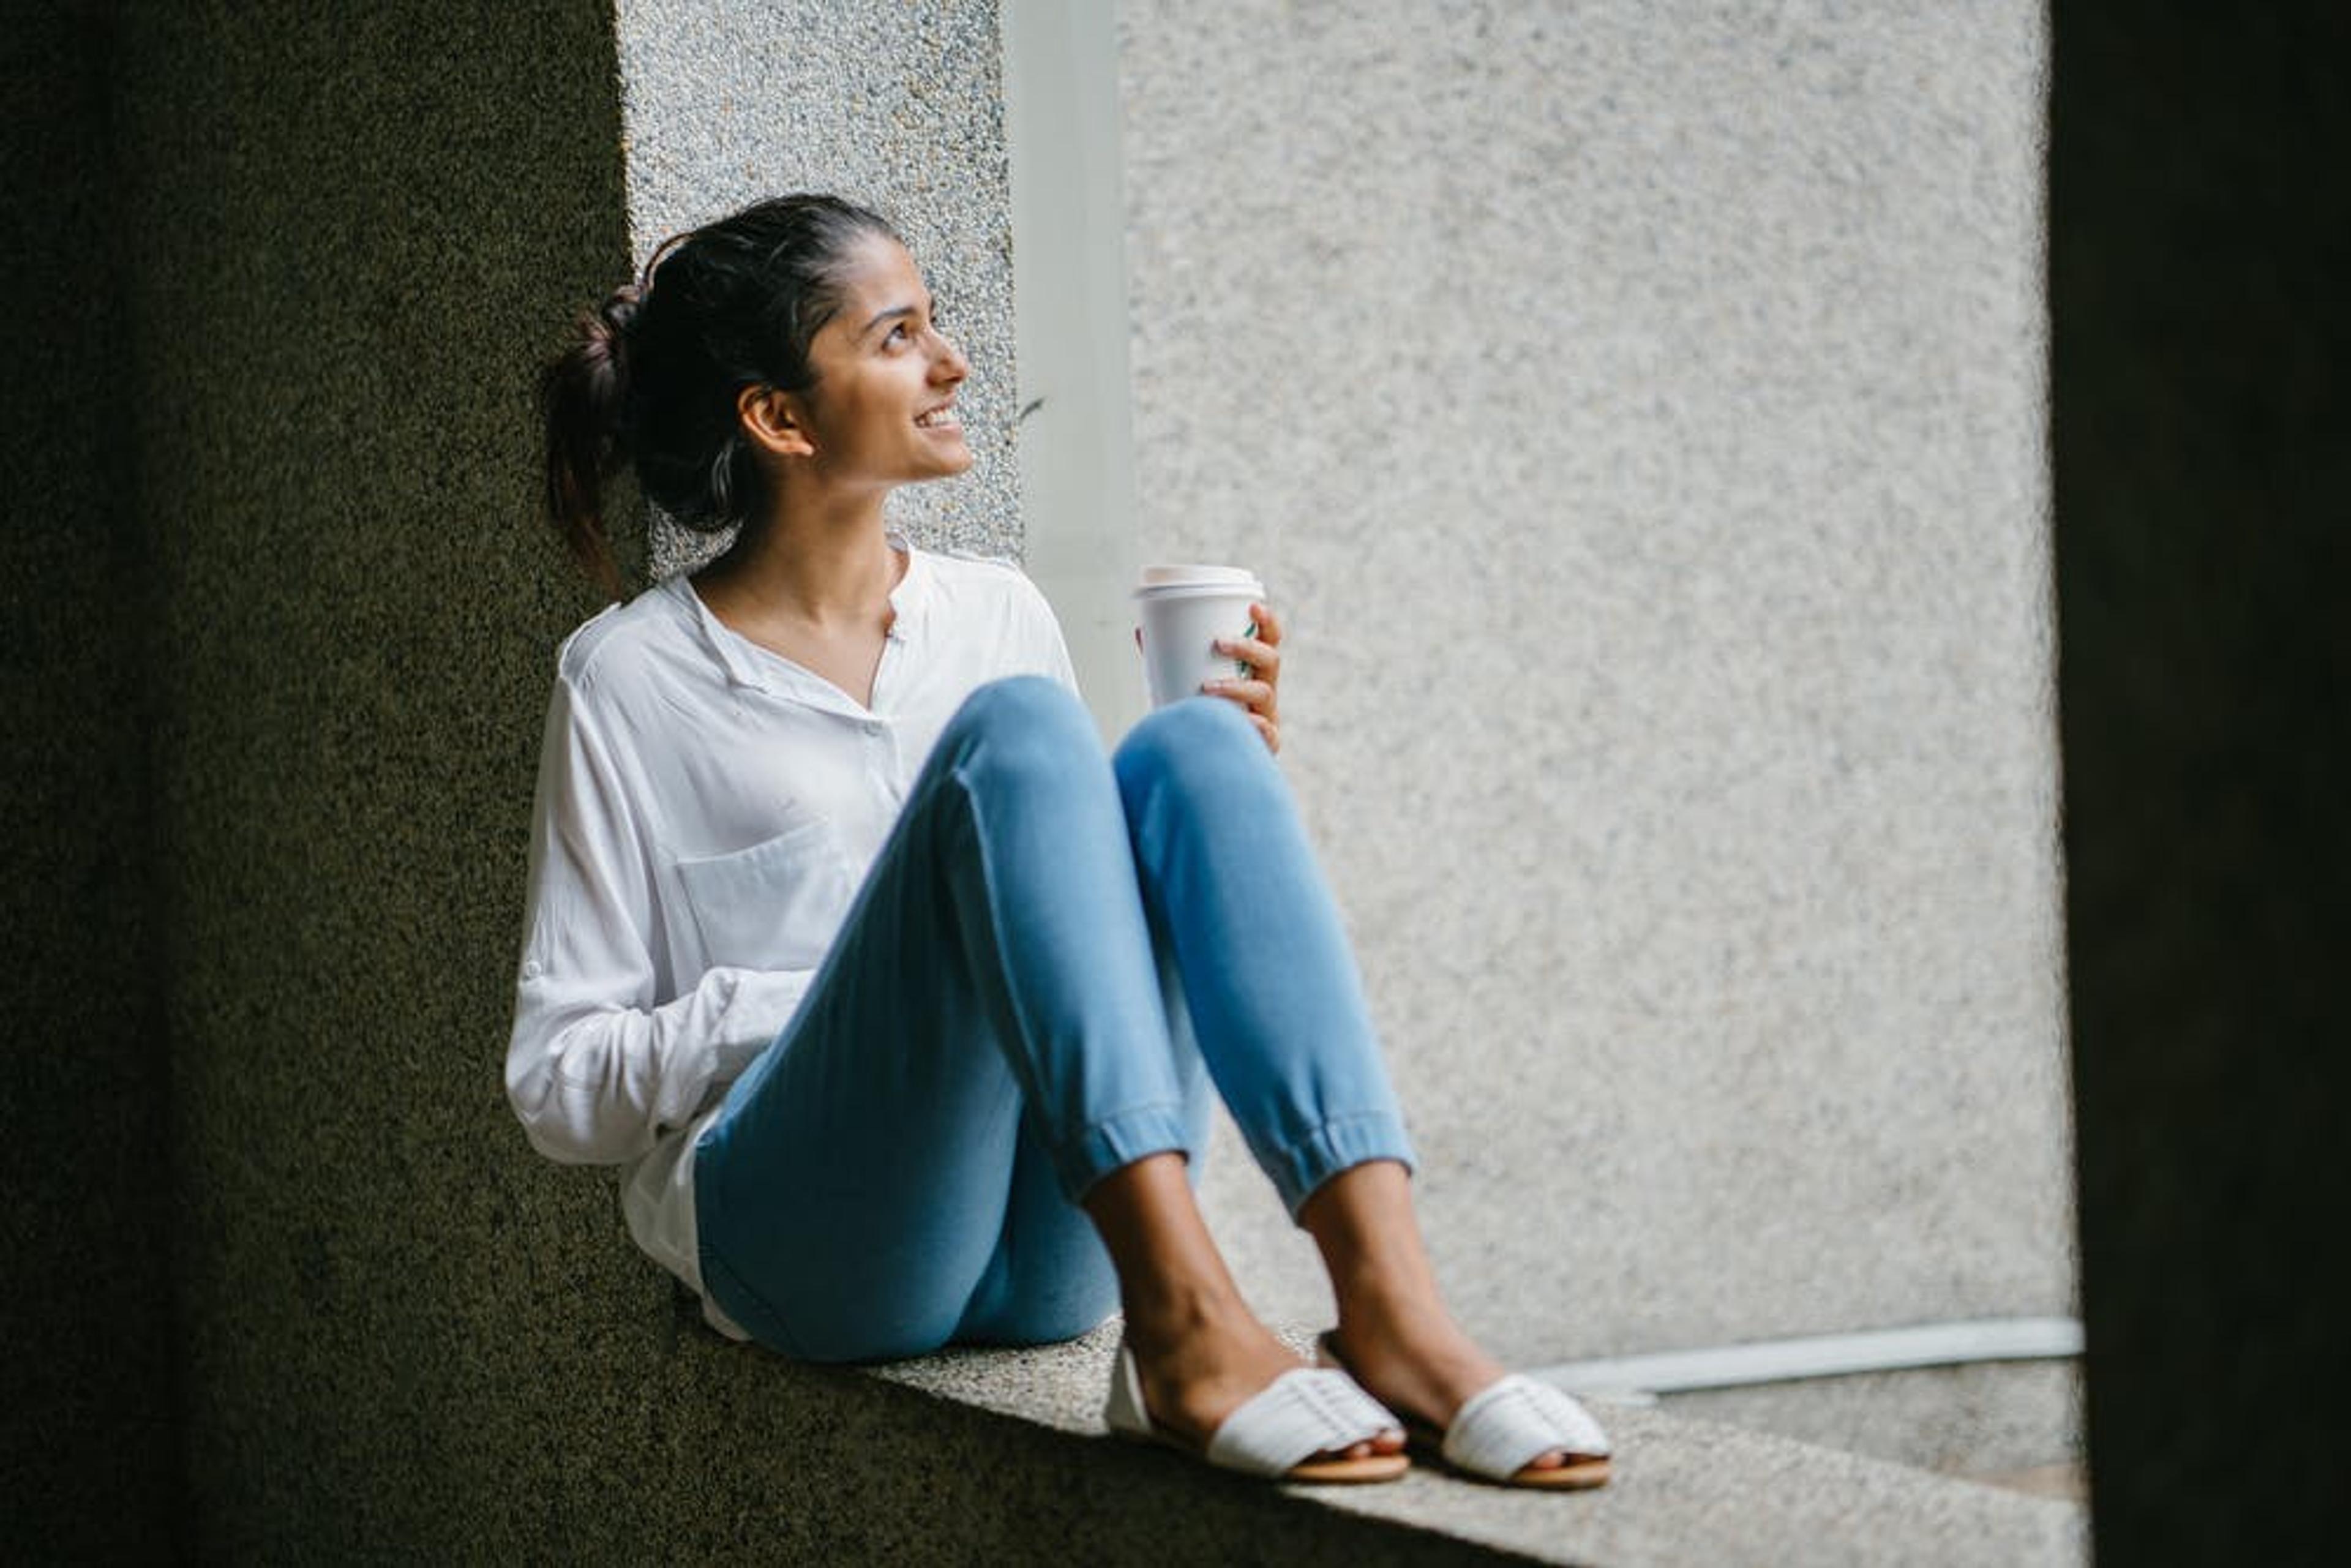 A young woman sits on a window ledge holding a cup of coffee, looking up and smiling